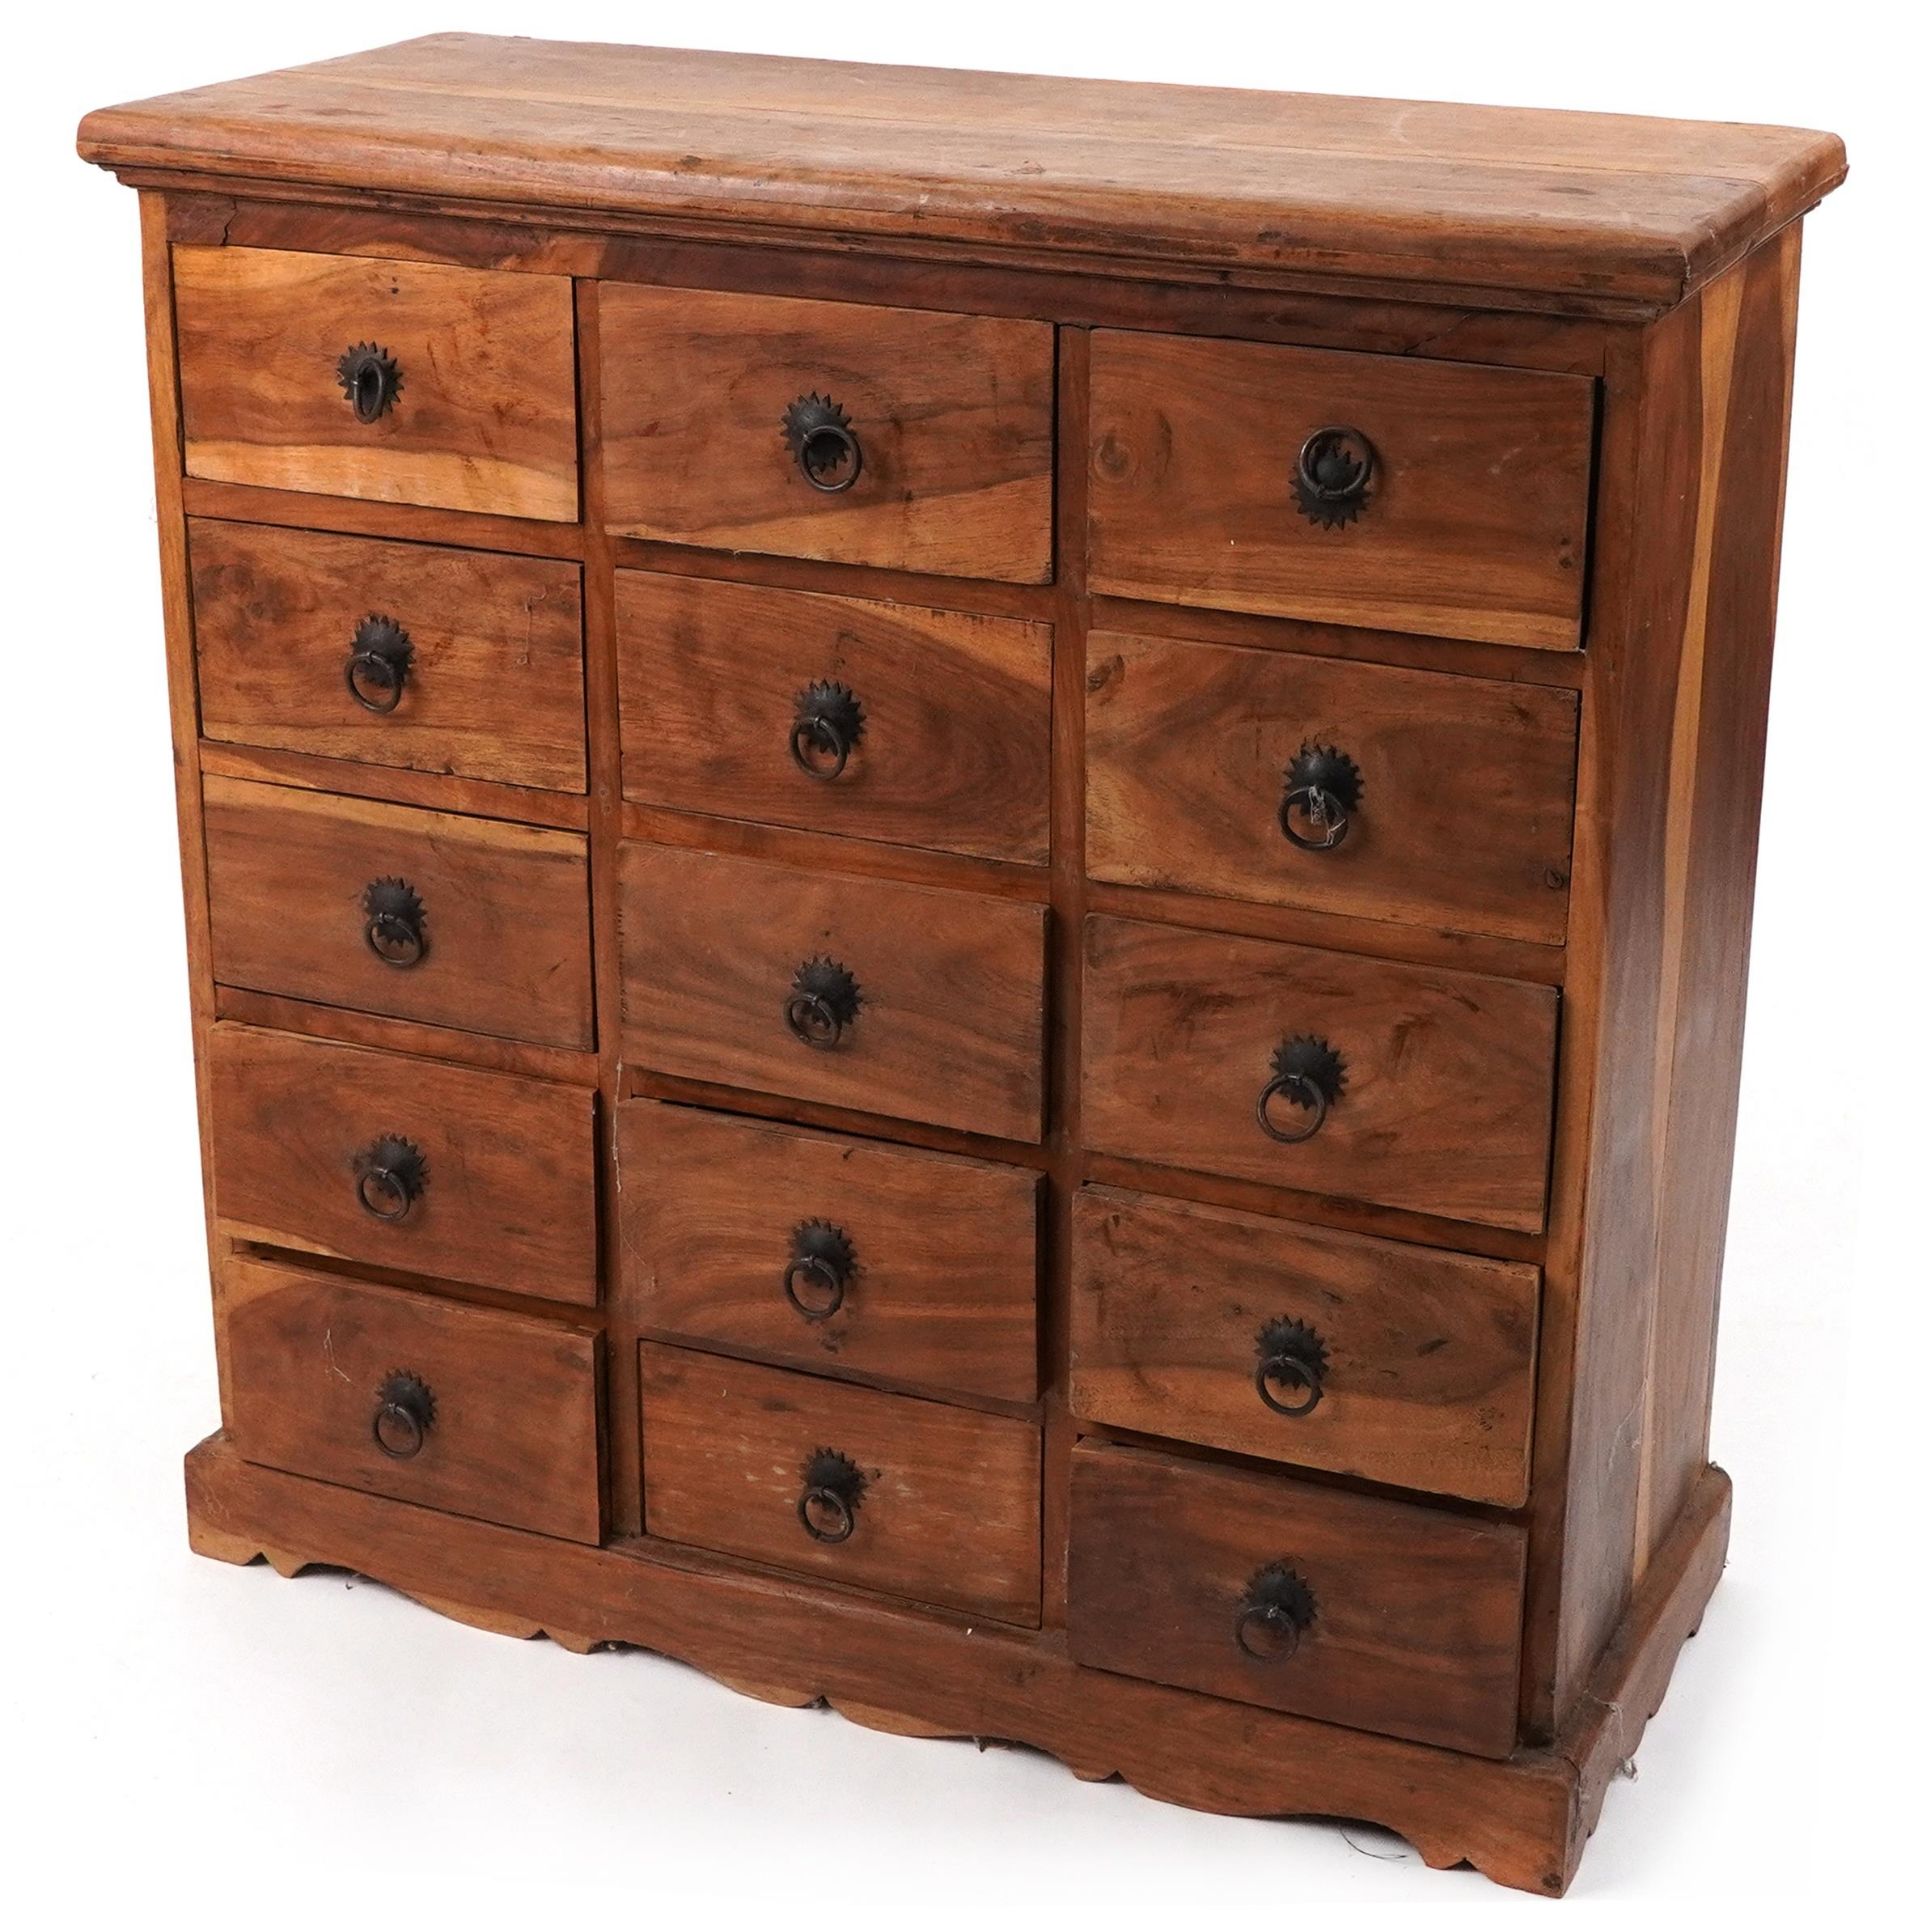 Asian hardwood fifteen drawer haberdashery chest, 89cm H x 88cm W x 36cm D : For further information